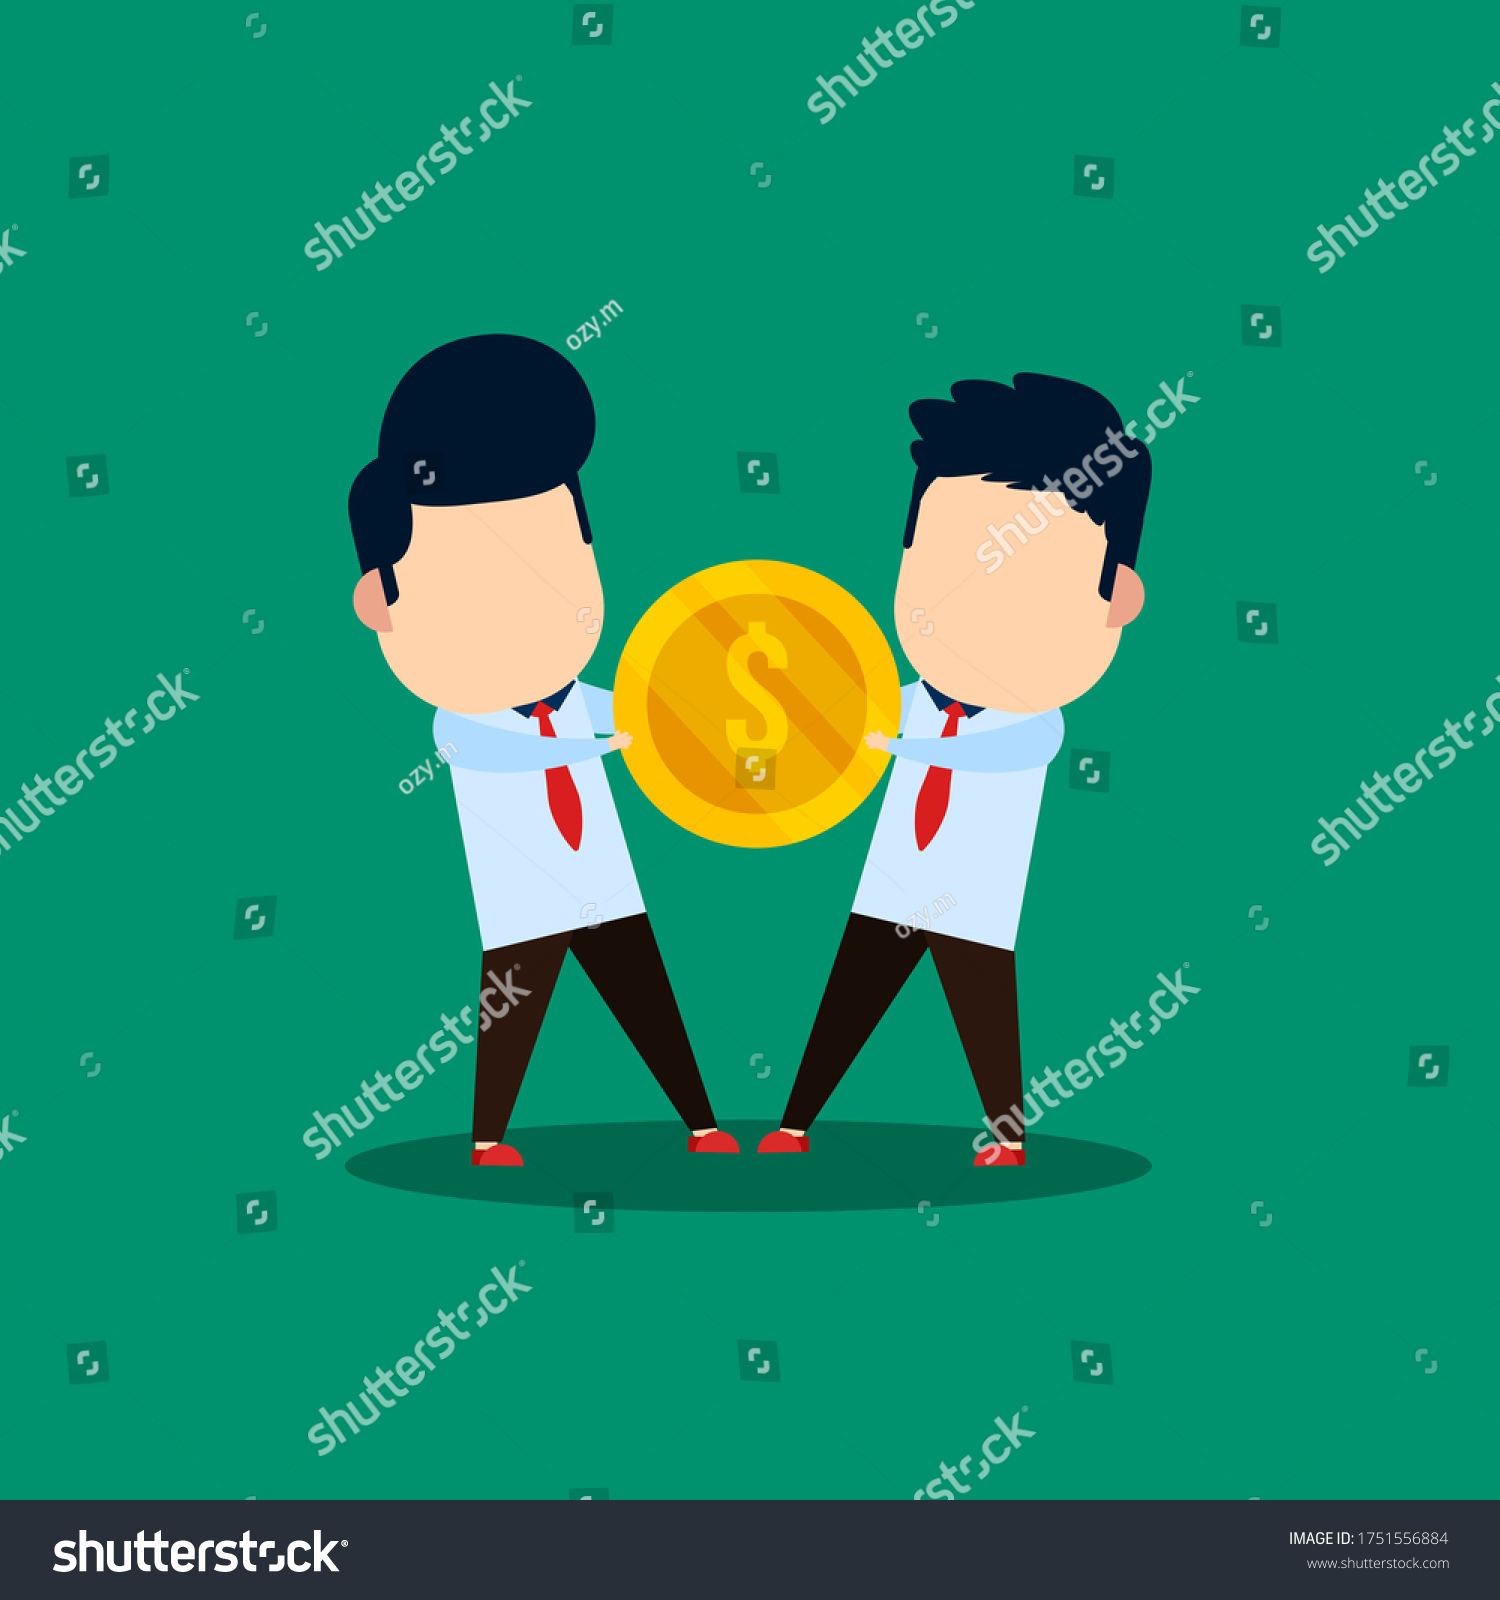 SVG of two businessmen fighting over coins svg